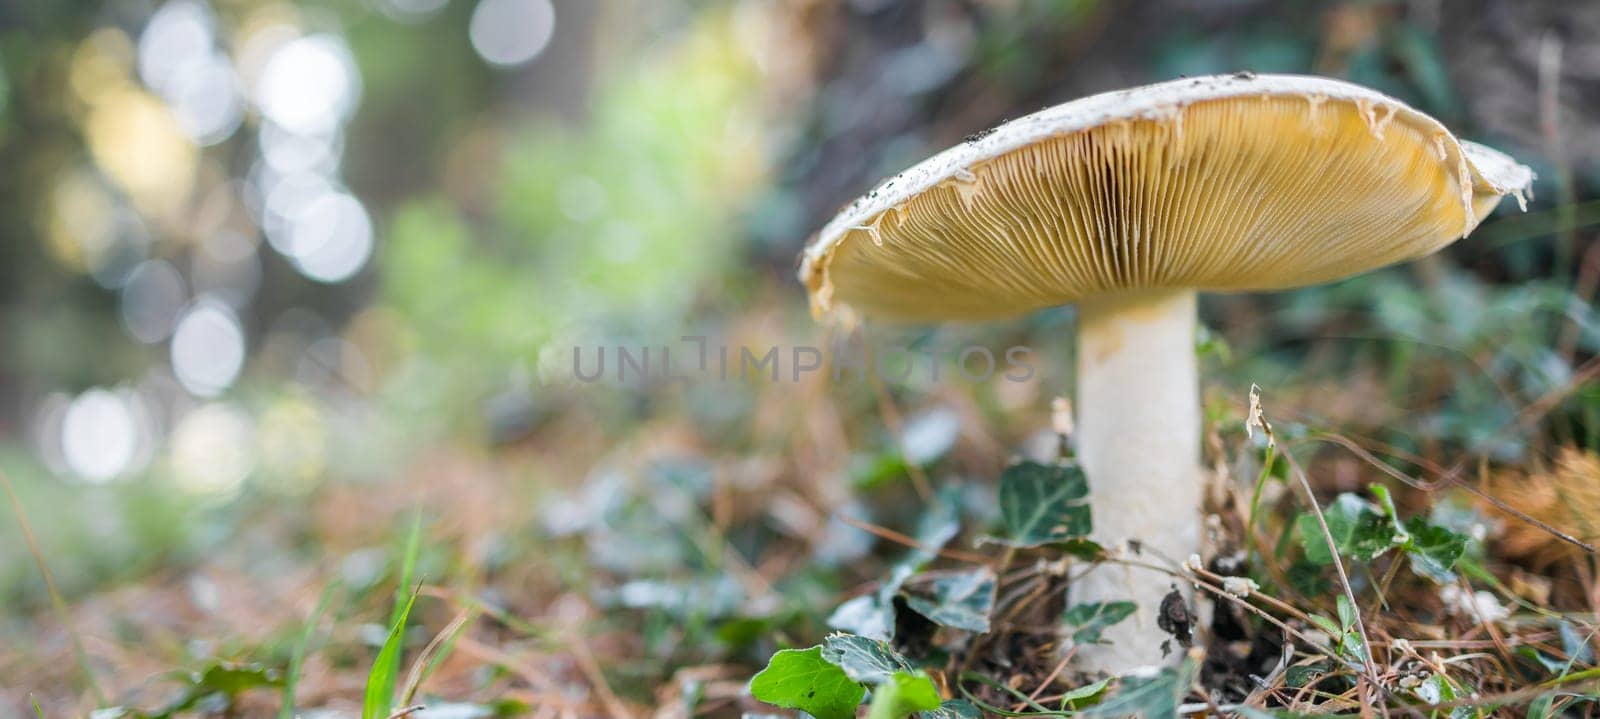 Ripe mushroom in summer forest scene. Mushroom macrophoto. Natural mushroom growing and pick up. Ecotourism activity. Copy space